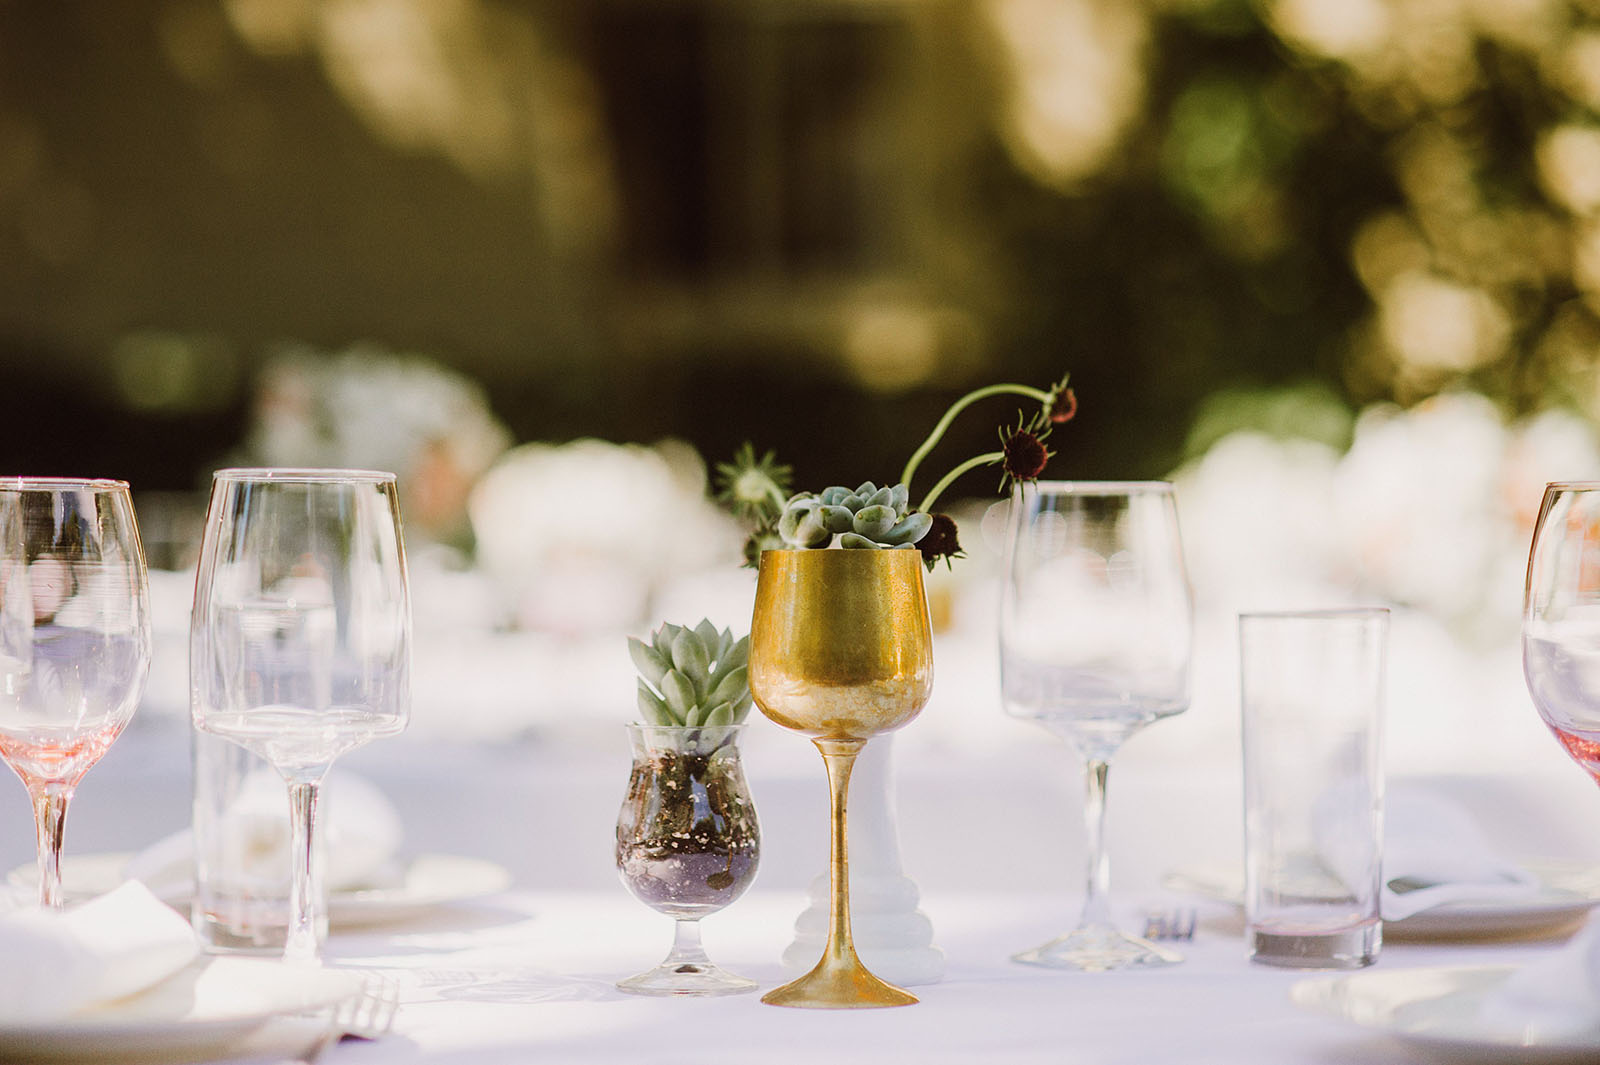 Gold goblet and succulent table settings | Backyard Chico California Wedding